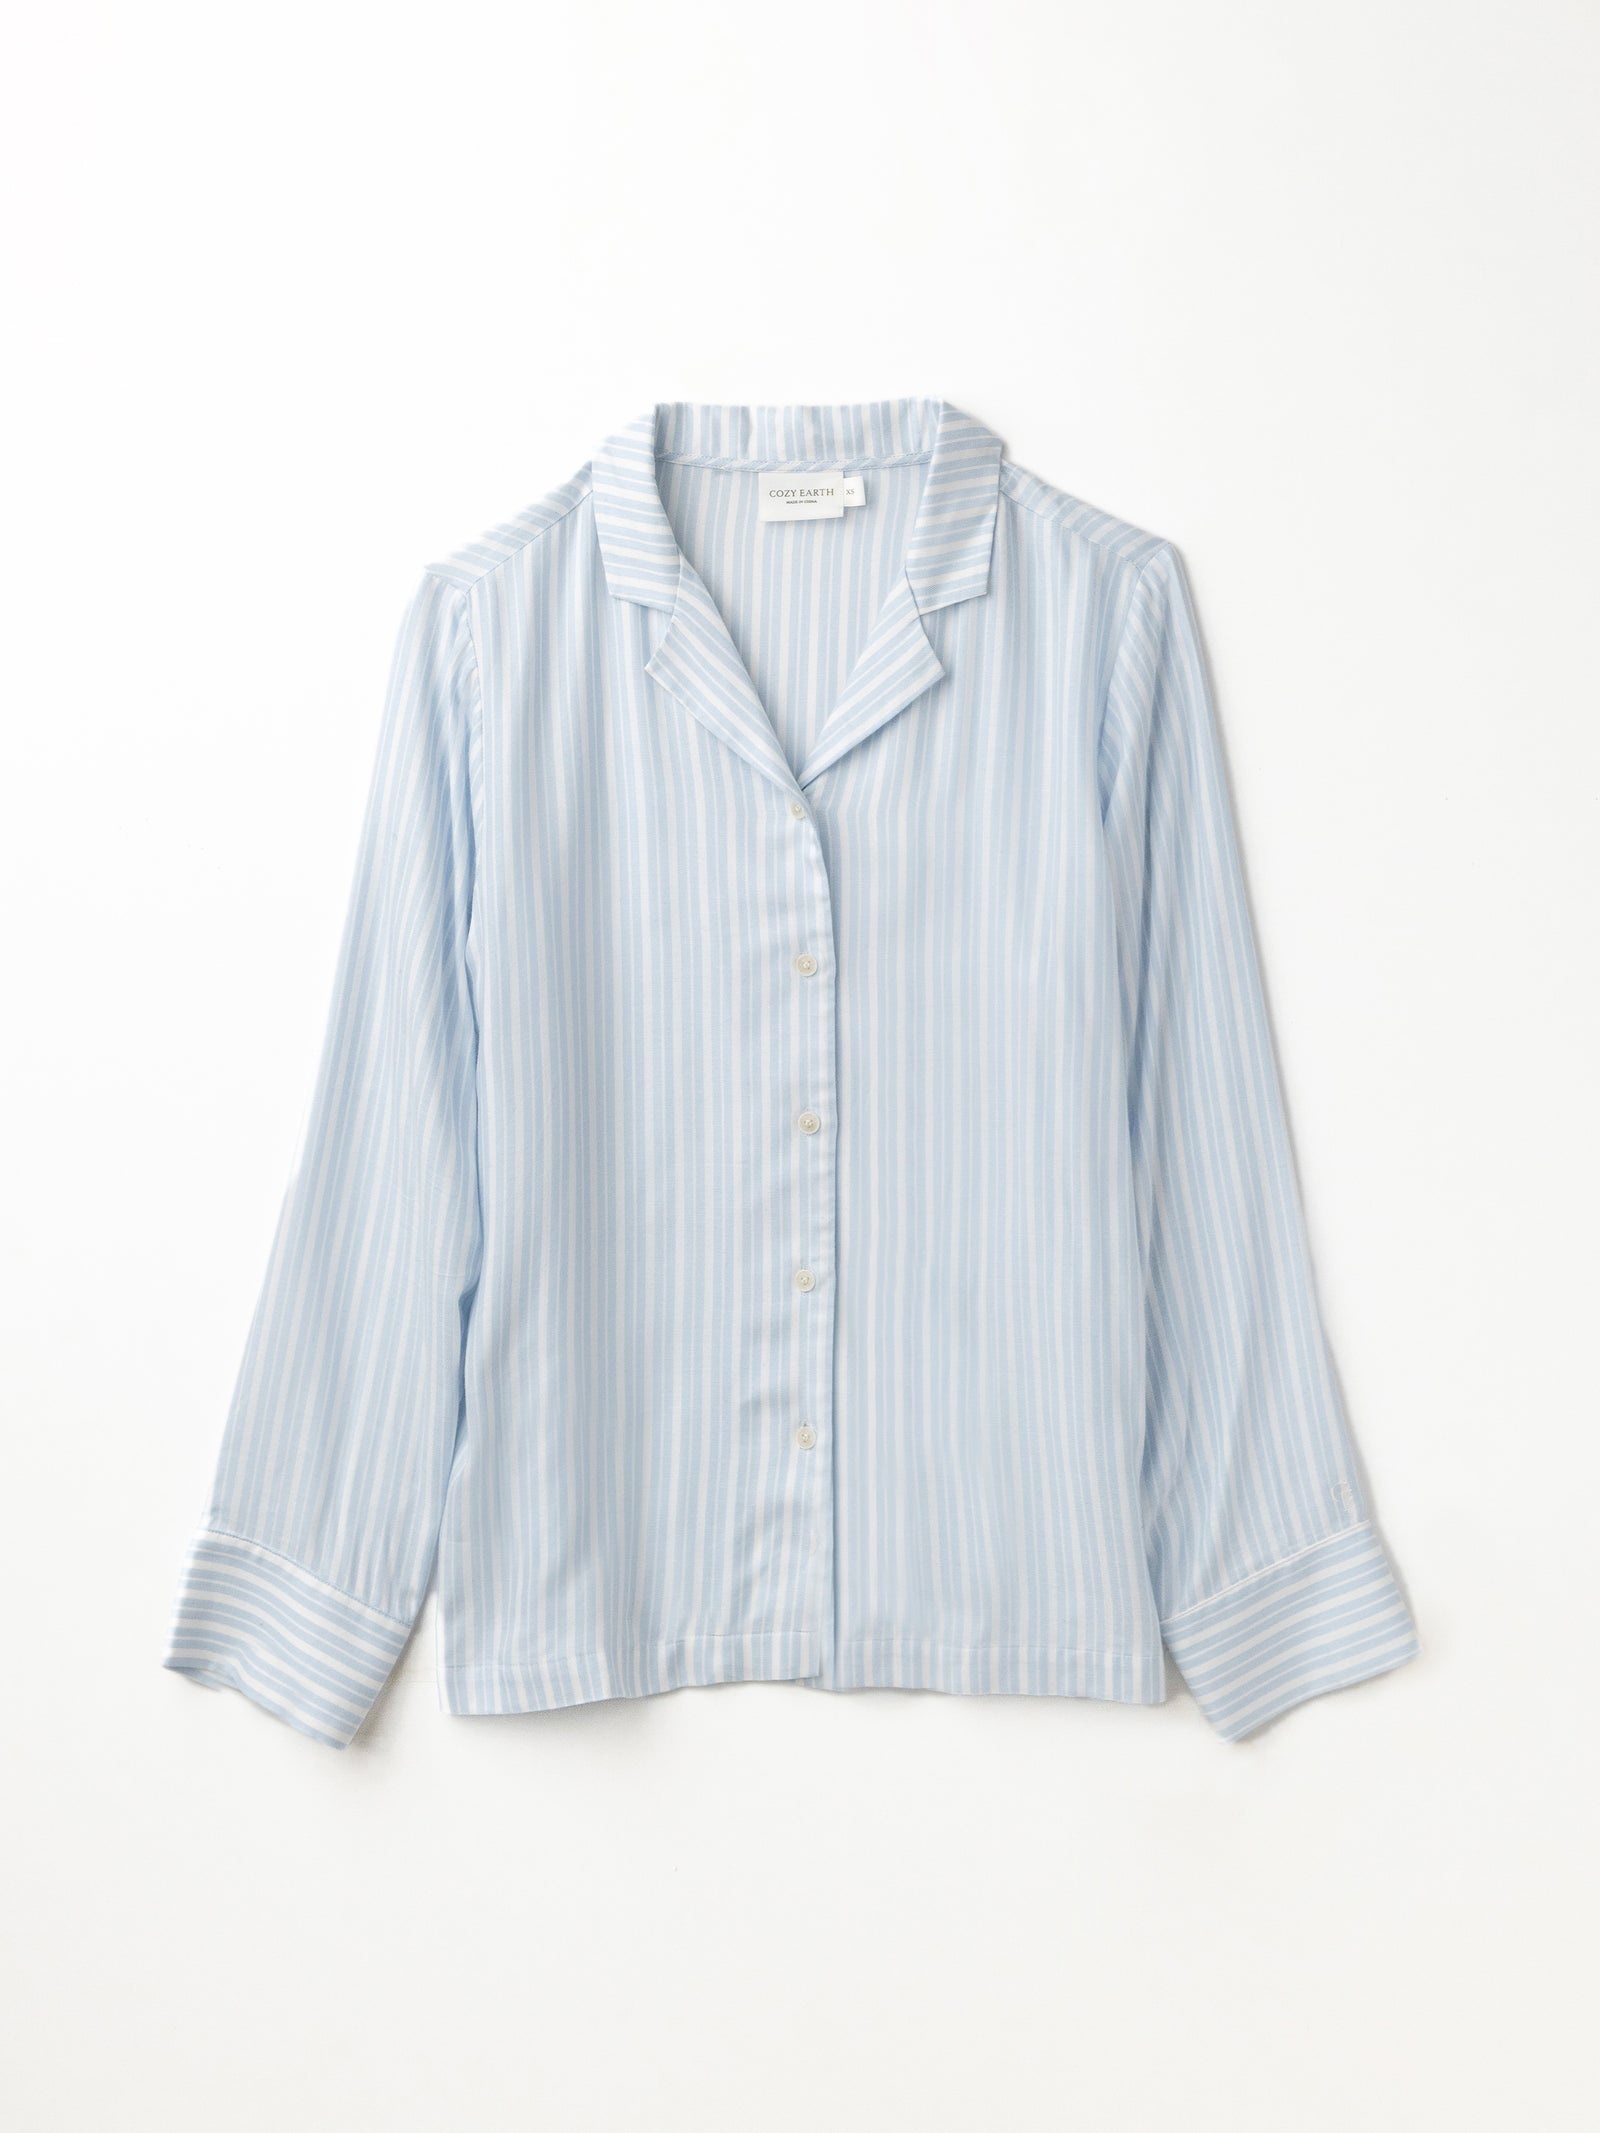 Soft woven pajama top in Spring Blue Stripe with white background 